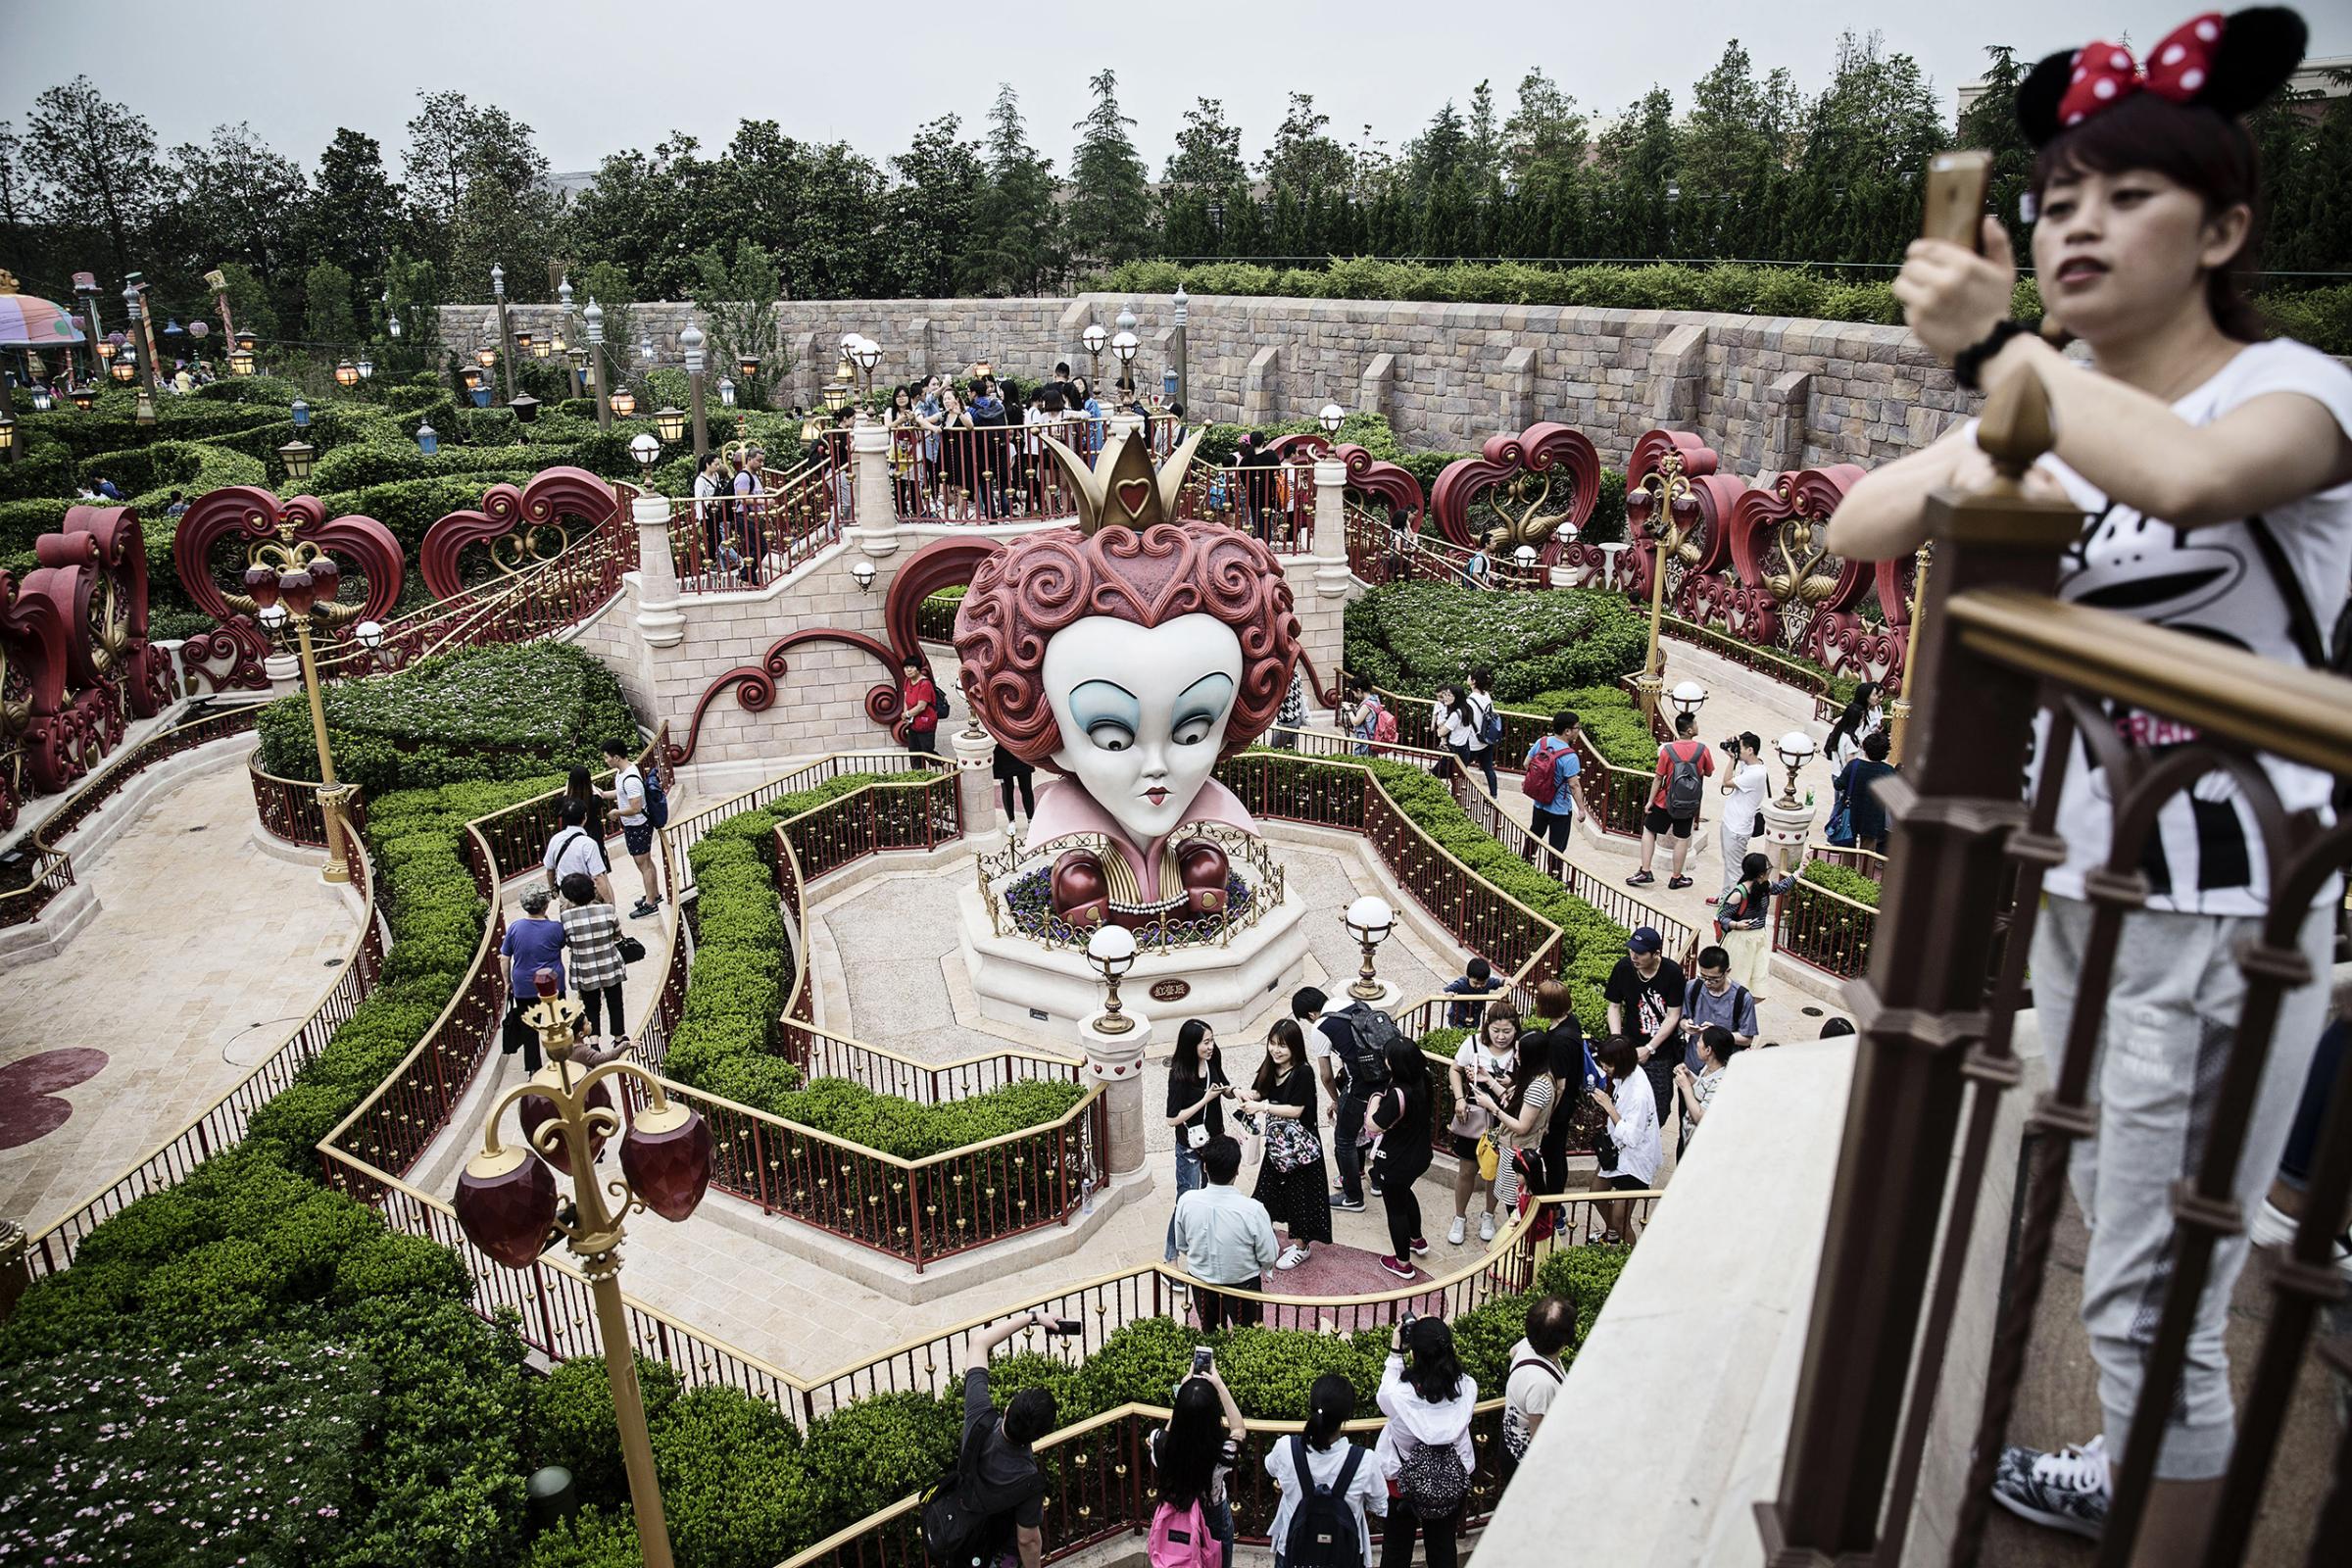 Visitors walk through the Alice in Wonderland Maze during a trial run at Shanghai Disneyland ahead of its official opening, June 8, 2016.